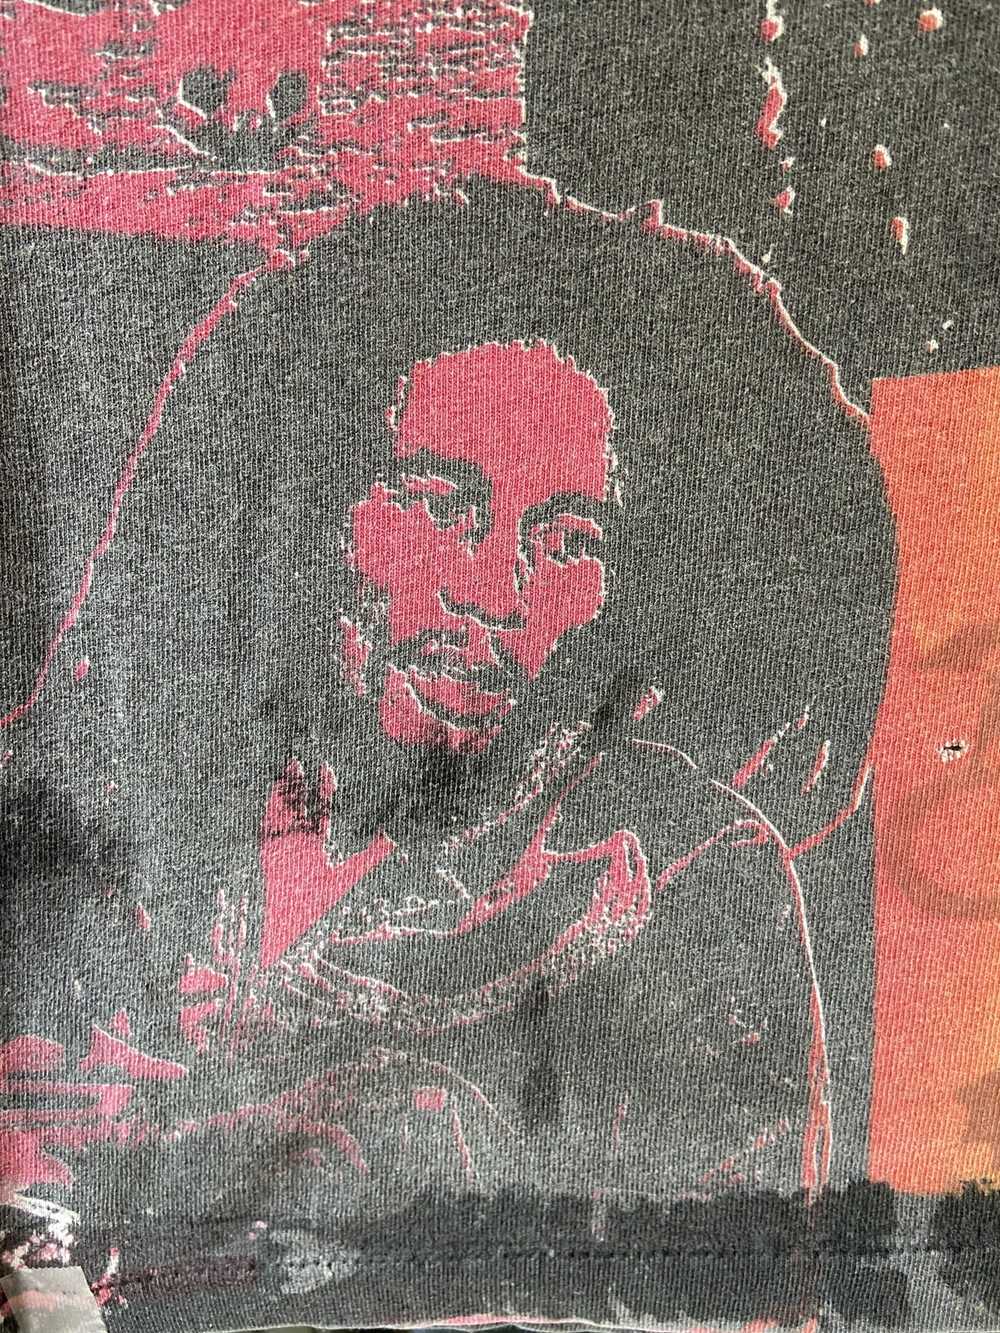 Other Mosquitohead Vintage Bob Marley T-shirt - image 4